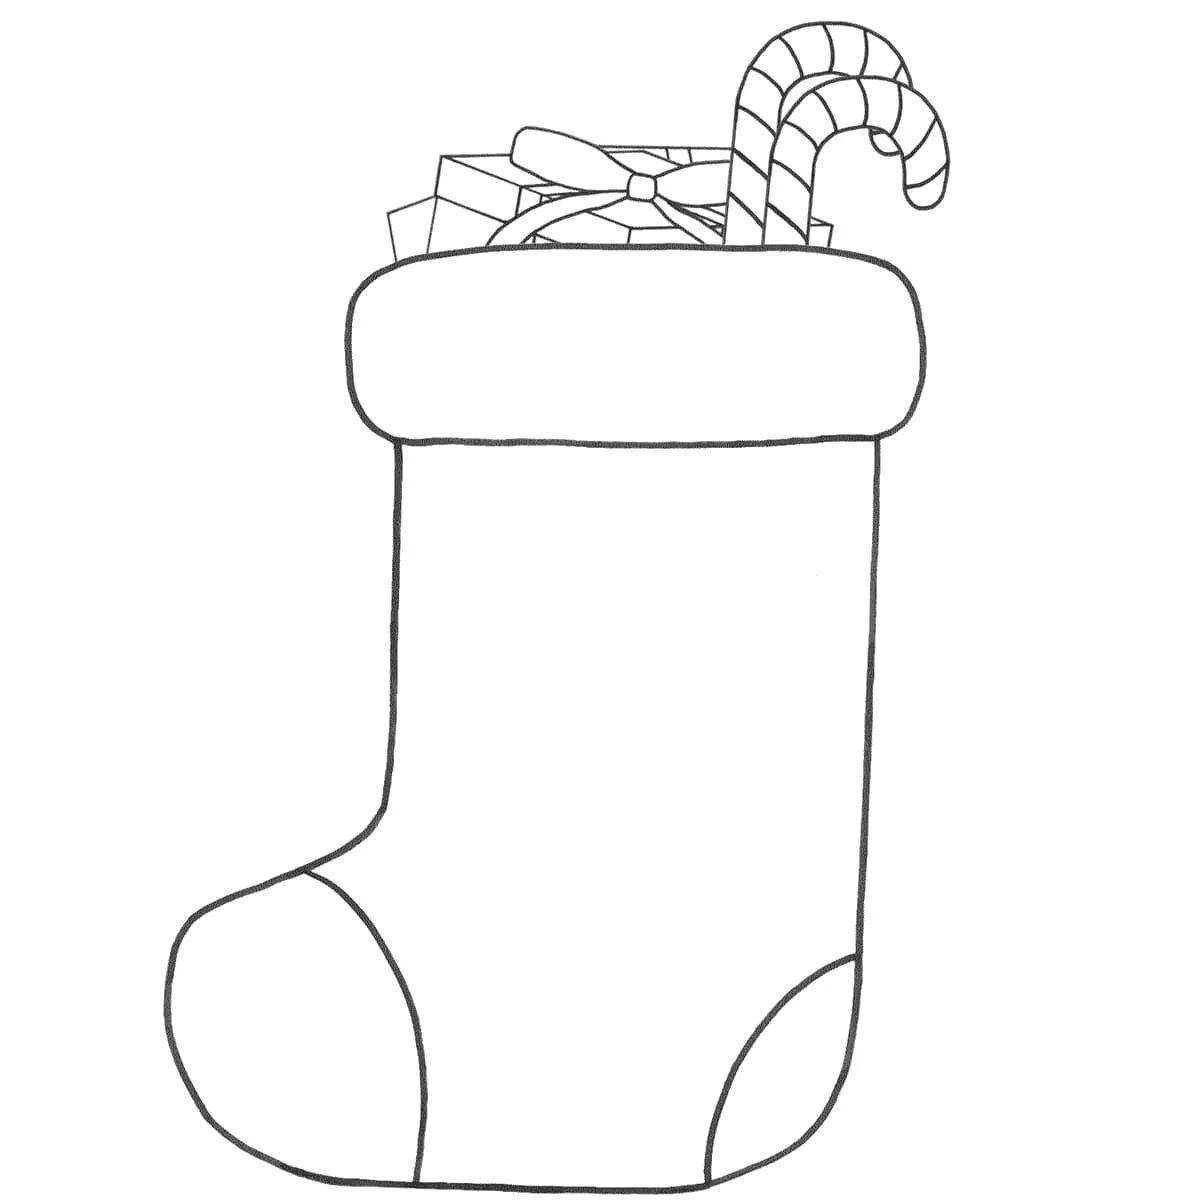 Awesome christmas boots coloring page